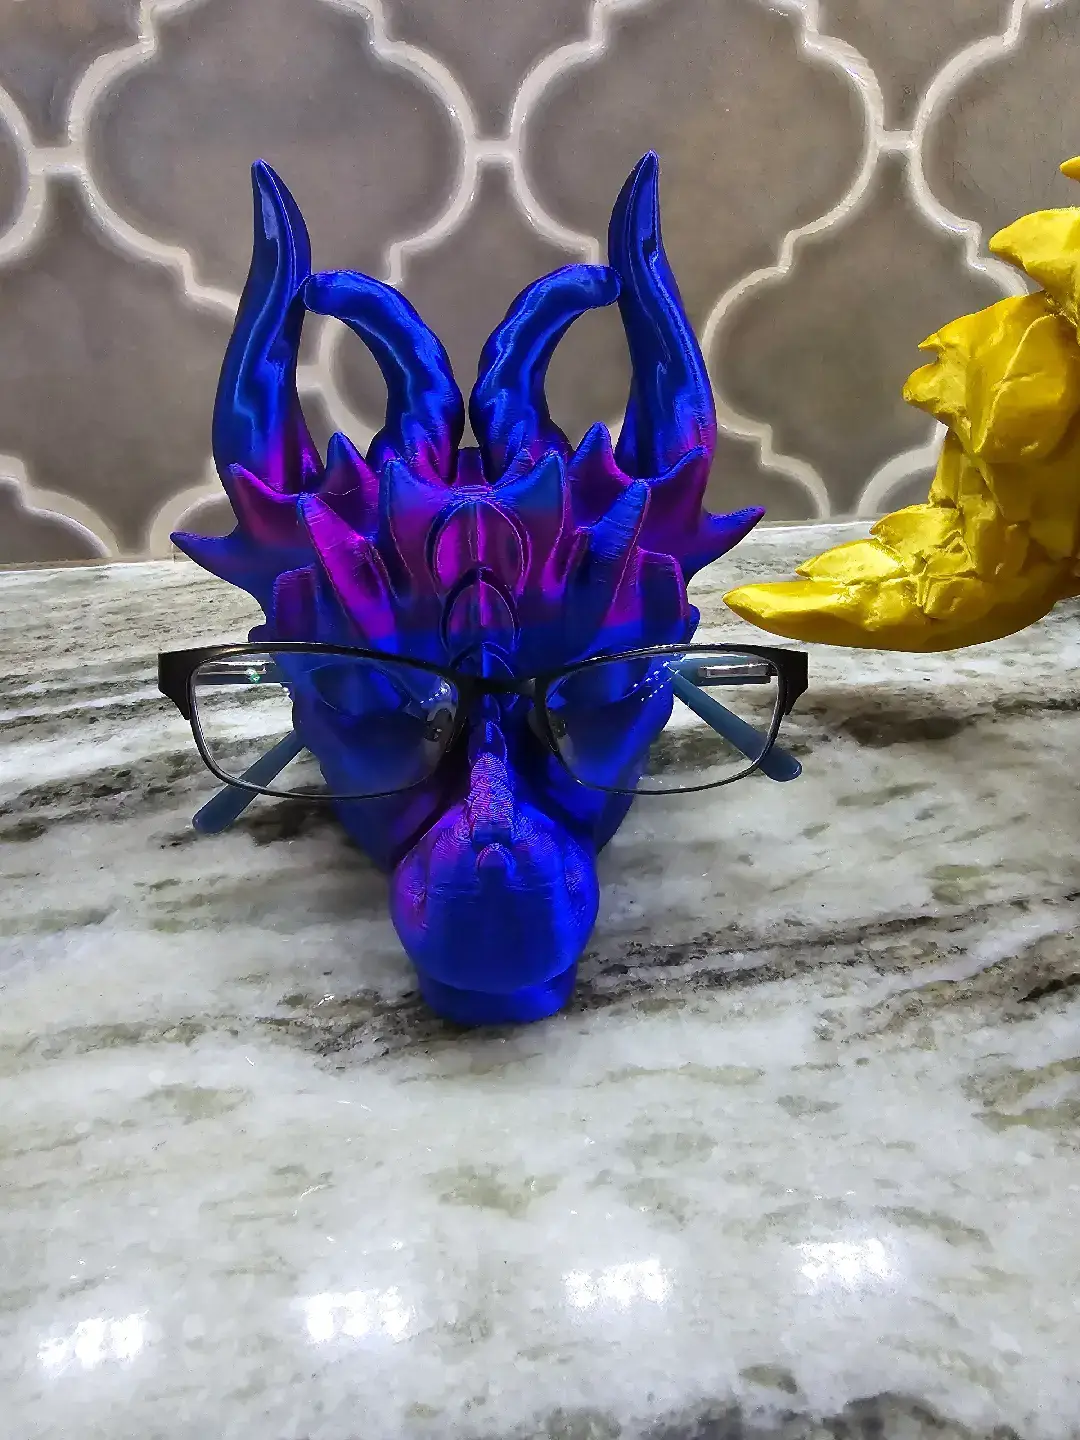 my new holder for my glasses. Just pulled her off the printer. plan to paint her eyes.  #authorizedseller , #kekreations3d , #ironponds , #dragon, #3dprinting 